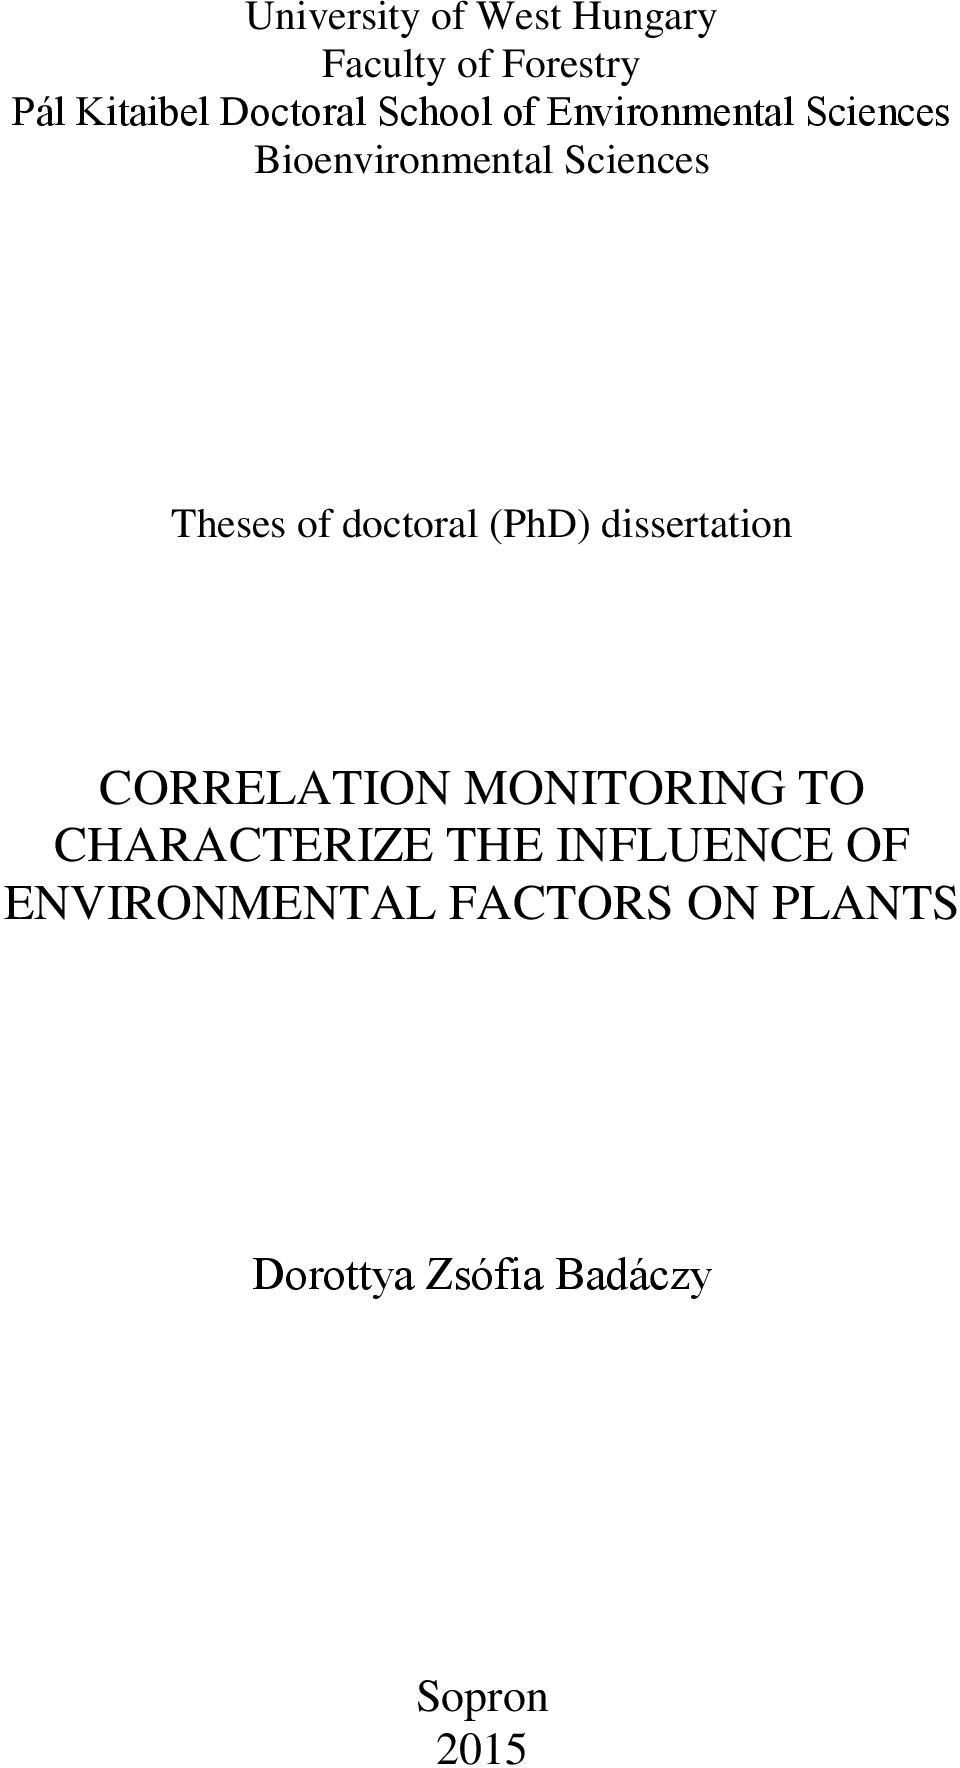 doctoral (PhD) dissertation CORRELATION MONITORING TO CHARACTERIZE THE